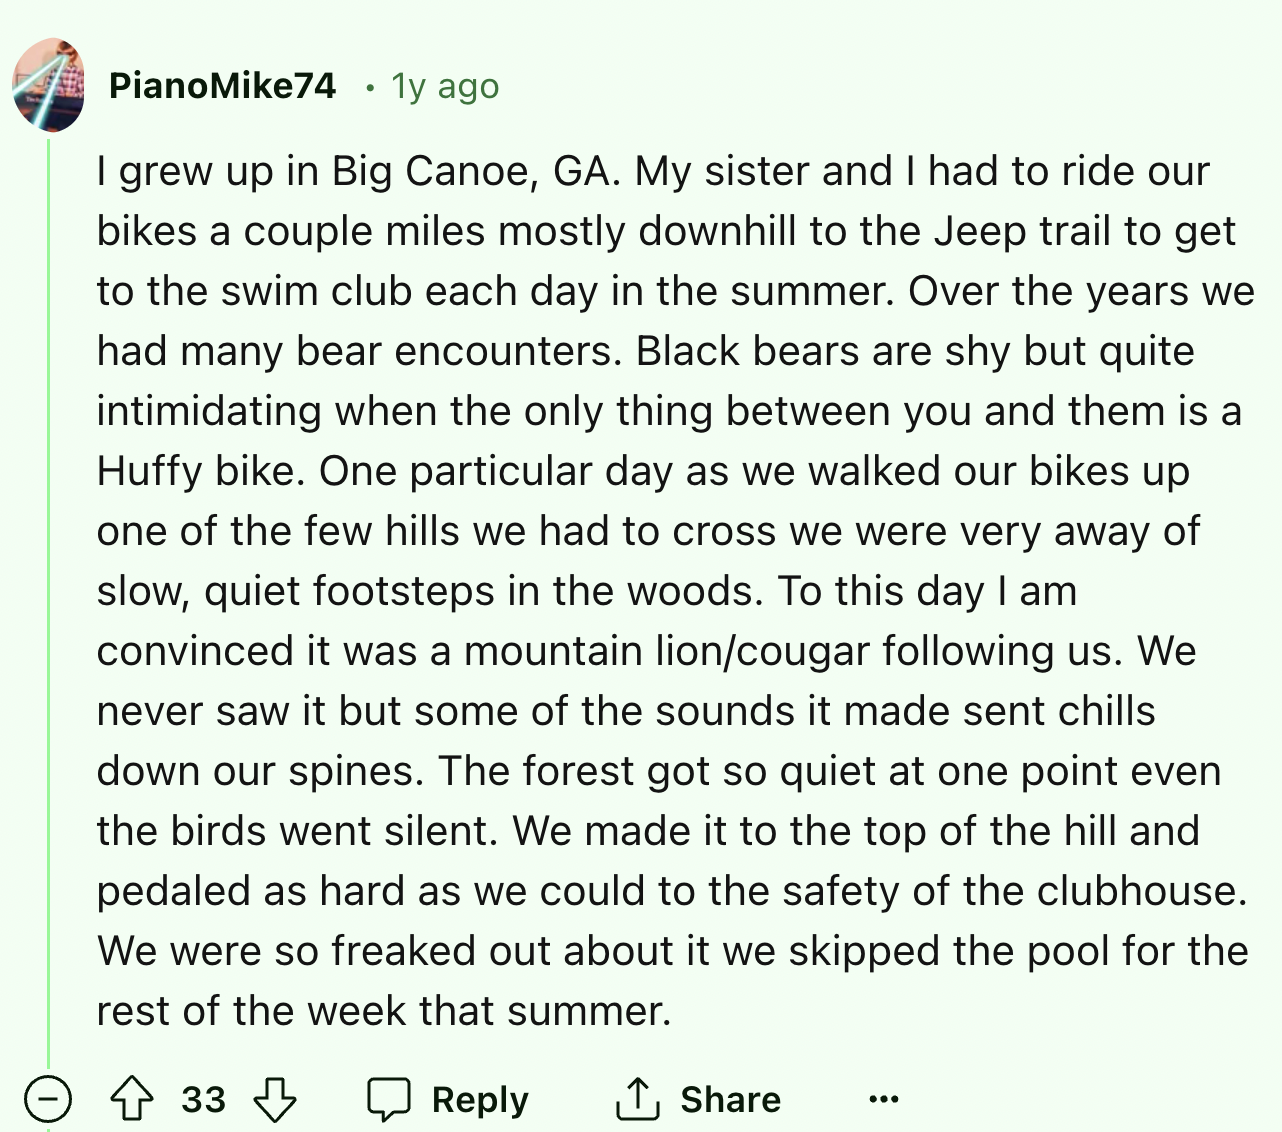 screenshot - PianoMike74 1y ago . I grew up in Big Canoe, Ga. My sister and I had to ride our bikes a couple miles mostly downhill to the Jeep trail to get to the swim club each day in the summer. Over the years we had many bear encounters. Black bears ar